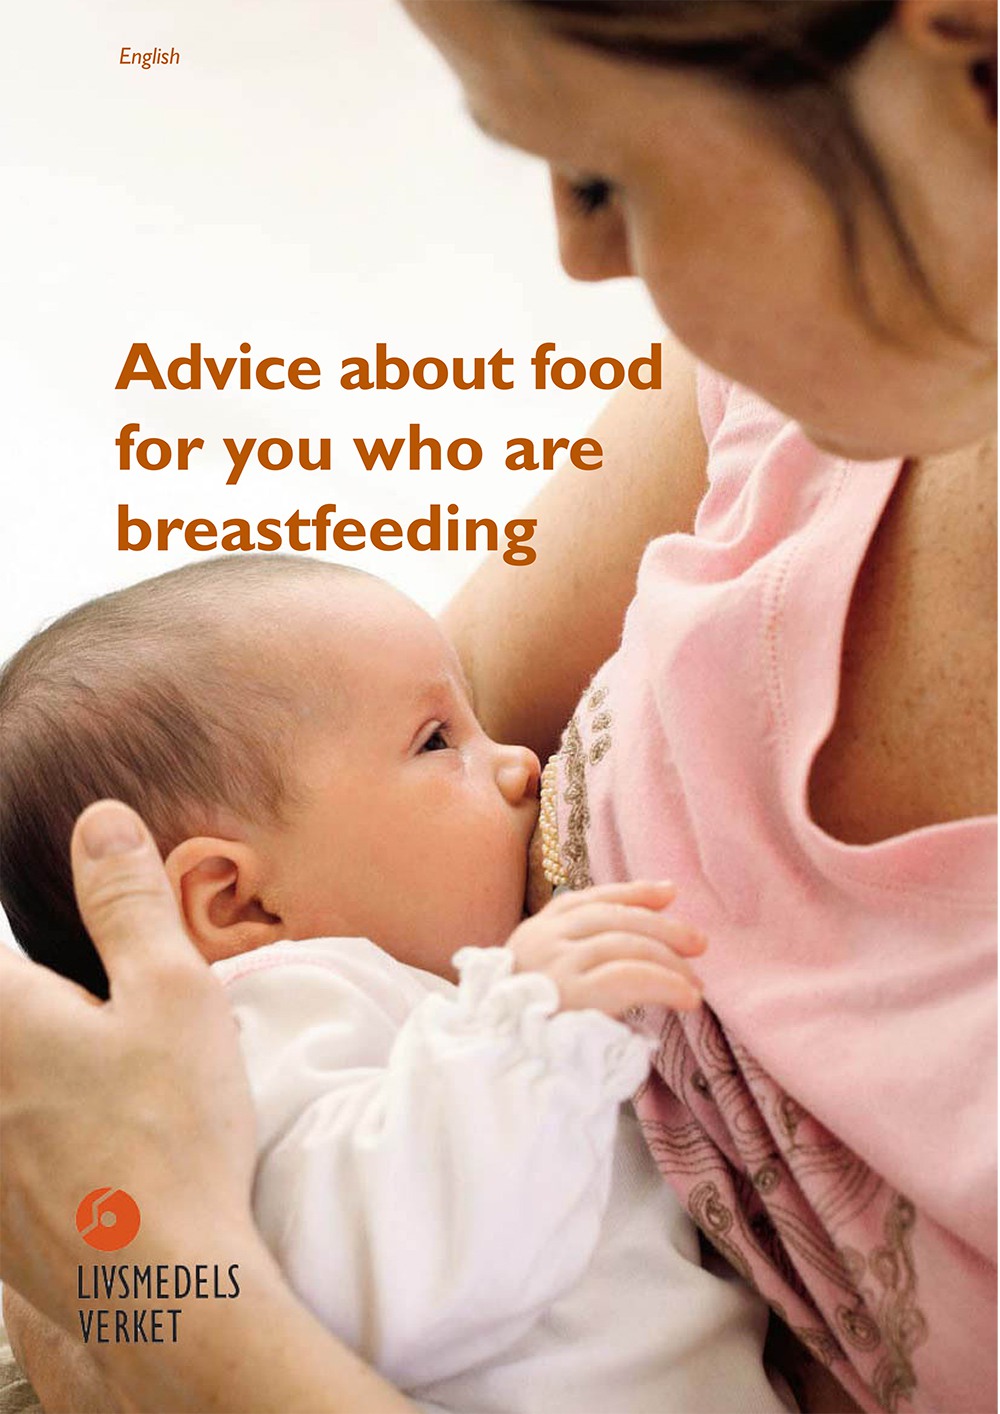 Frontpage of the brochure advice about food for you who are breastfeeding